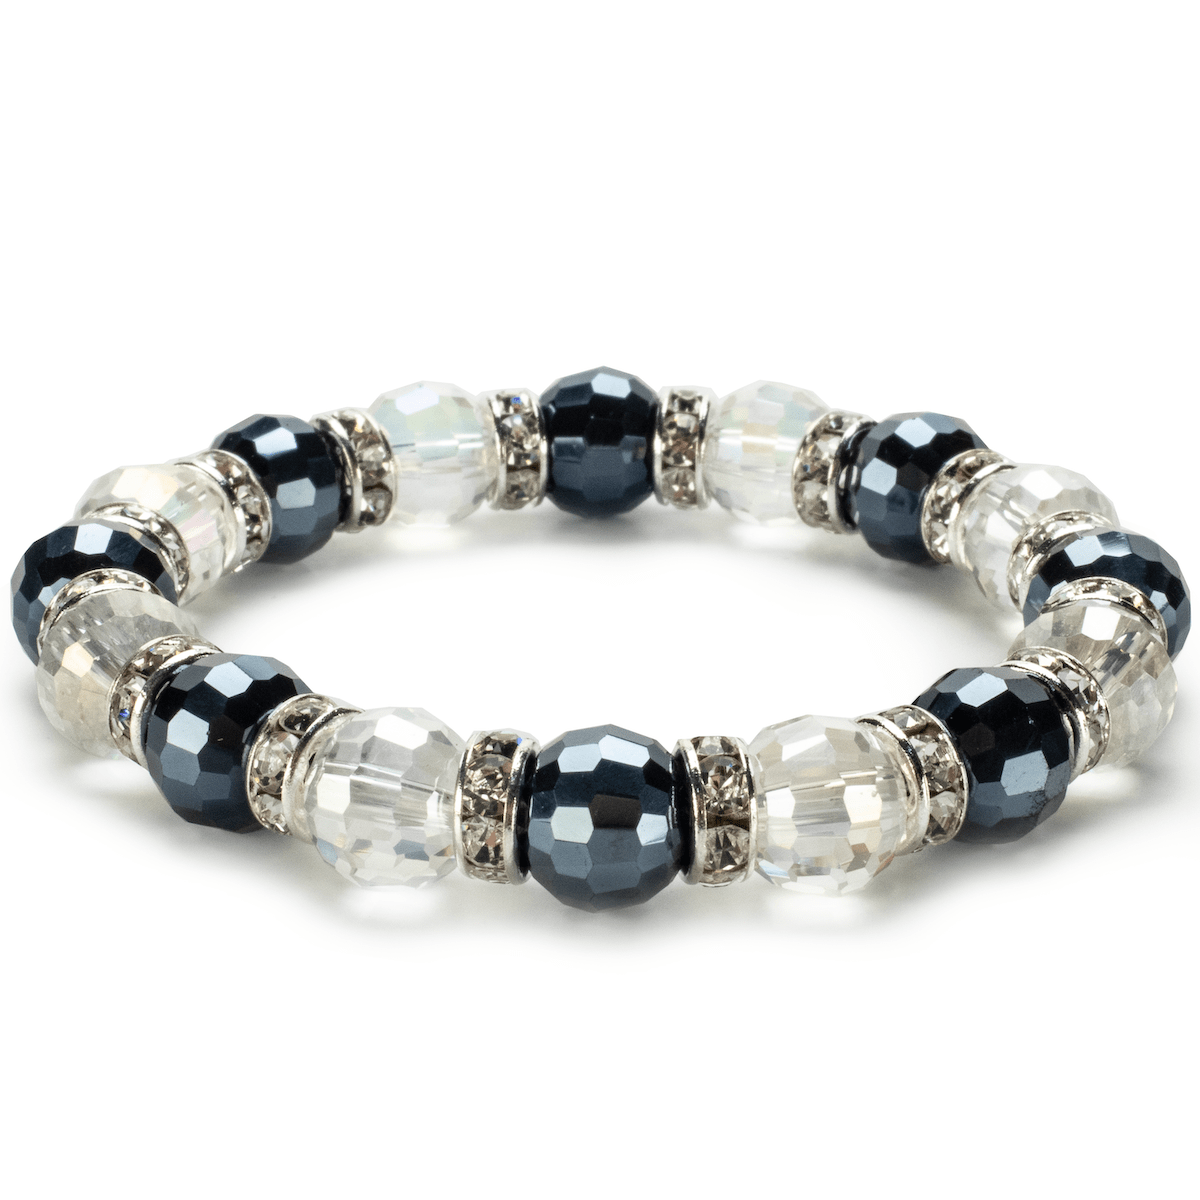 Kalifano Gorgeous Glass Jewelry White and Hematite Gorgeous Glass Bracelet with Cubic Zirconia Crystals BLUE-BGG-WH